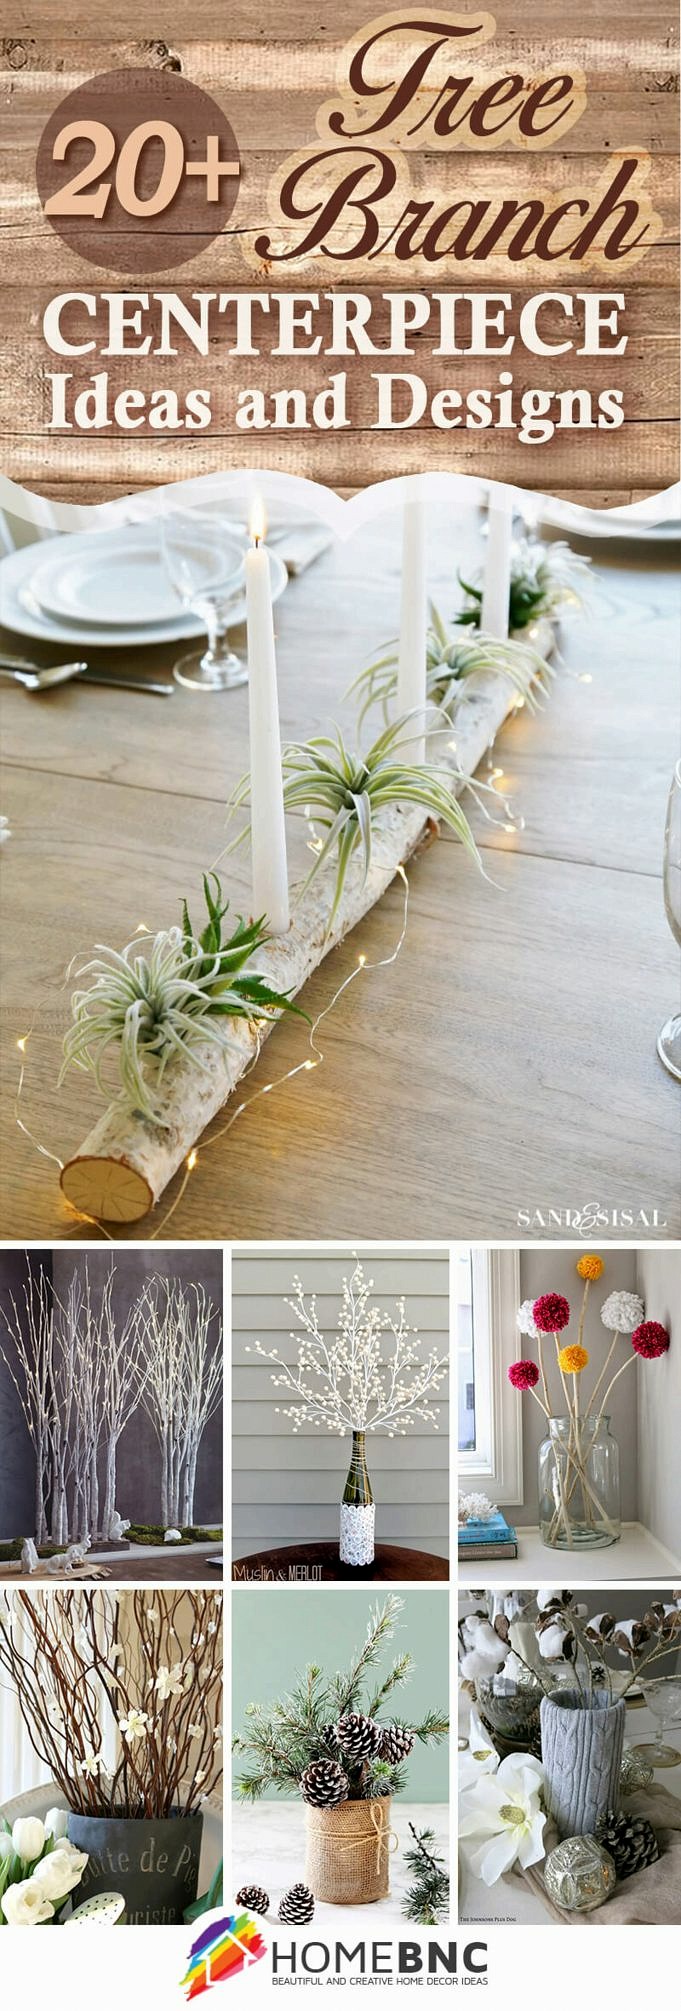 27 Gorgeous DIY Centerpieces For Your Space